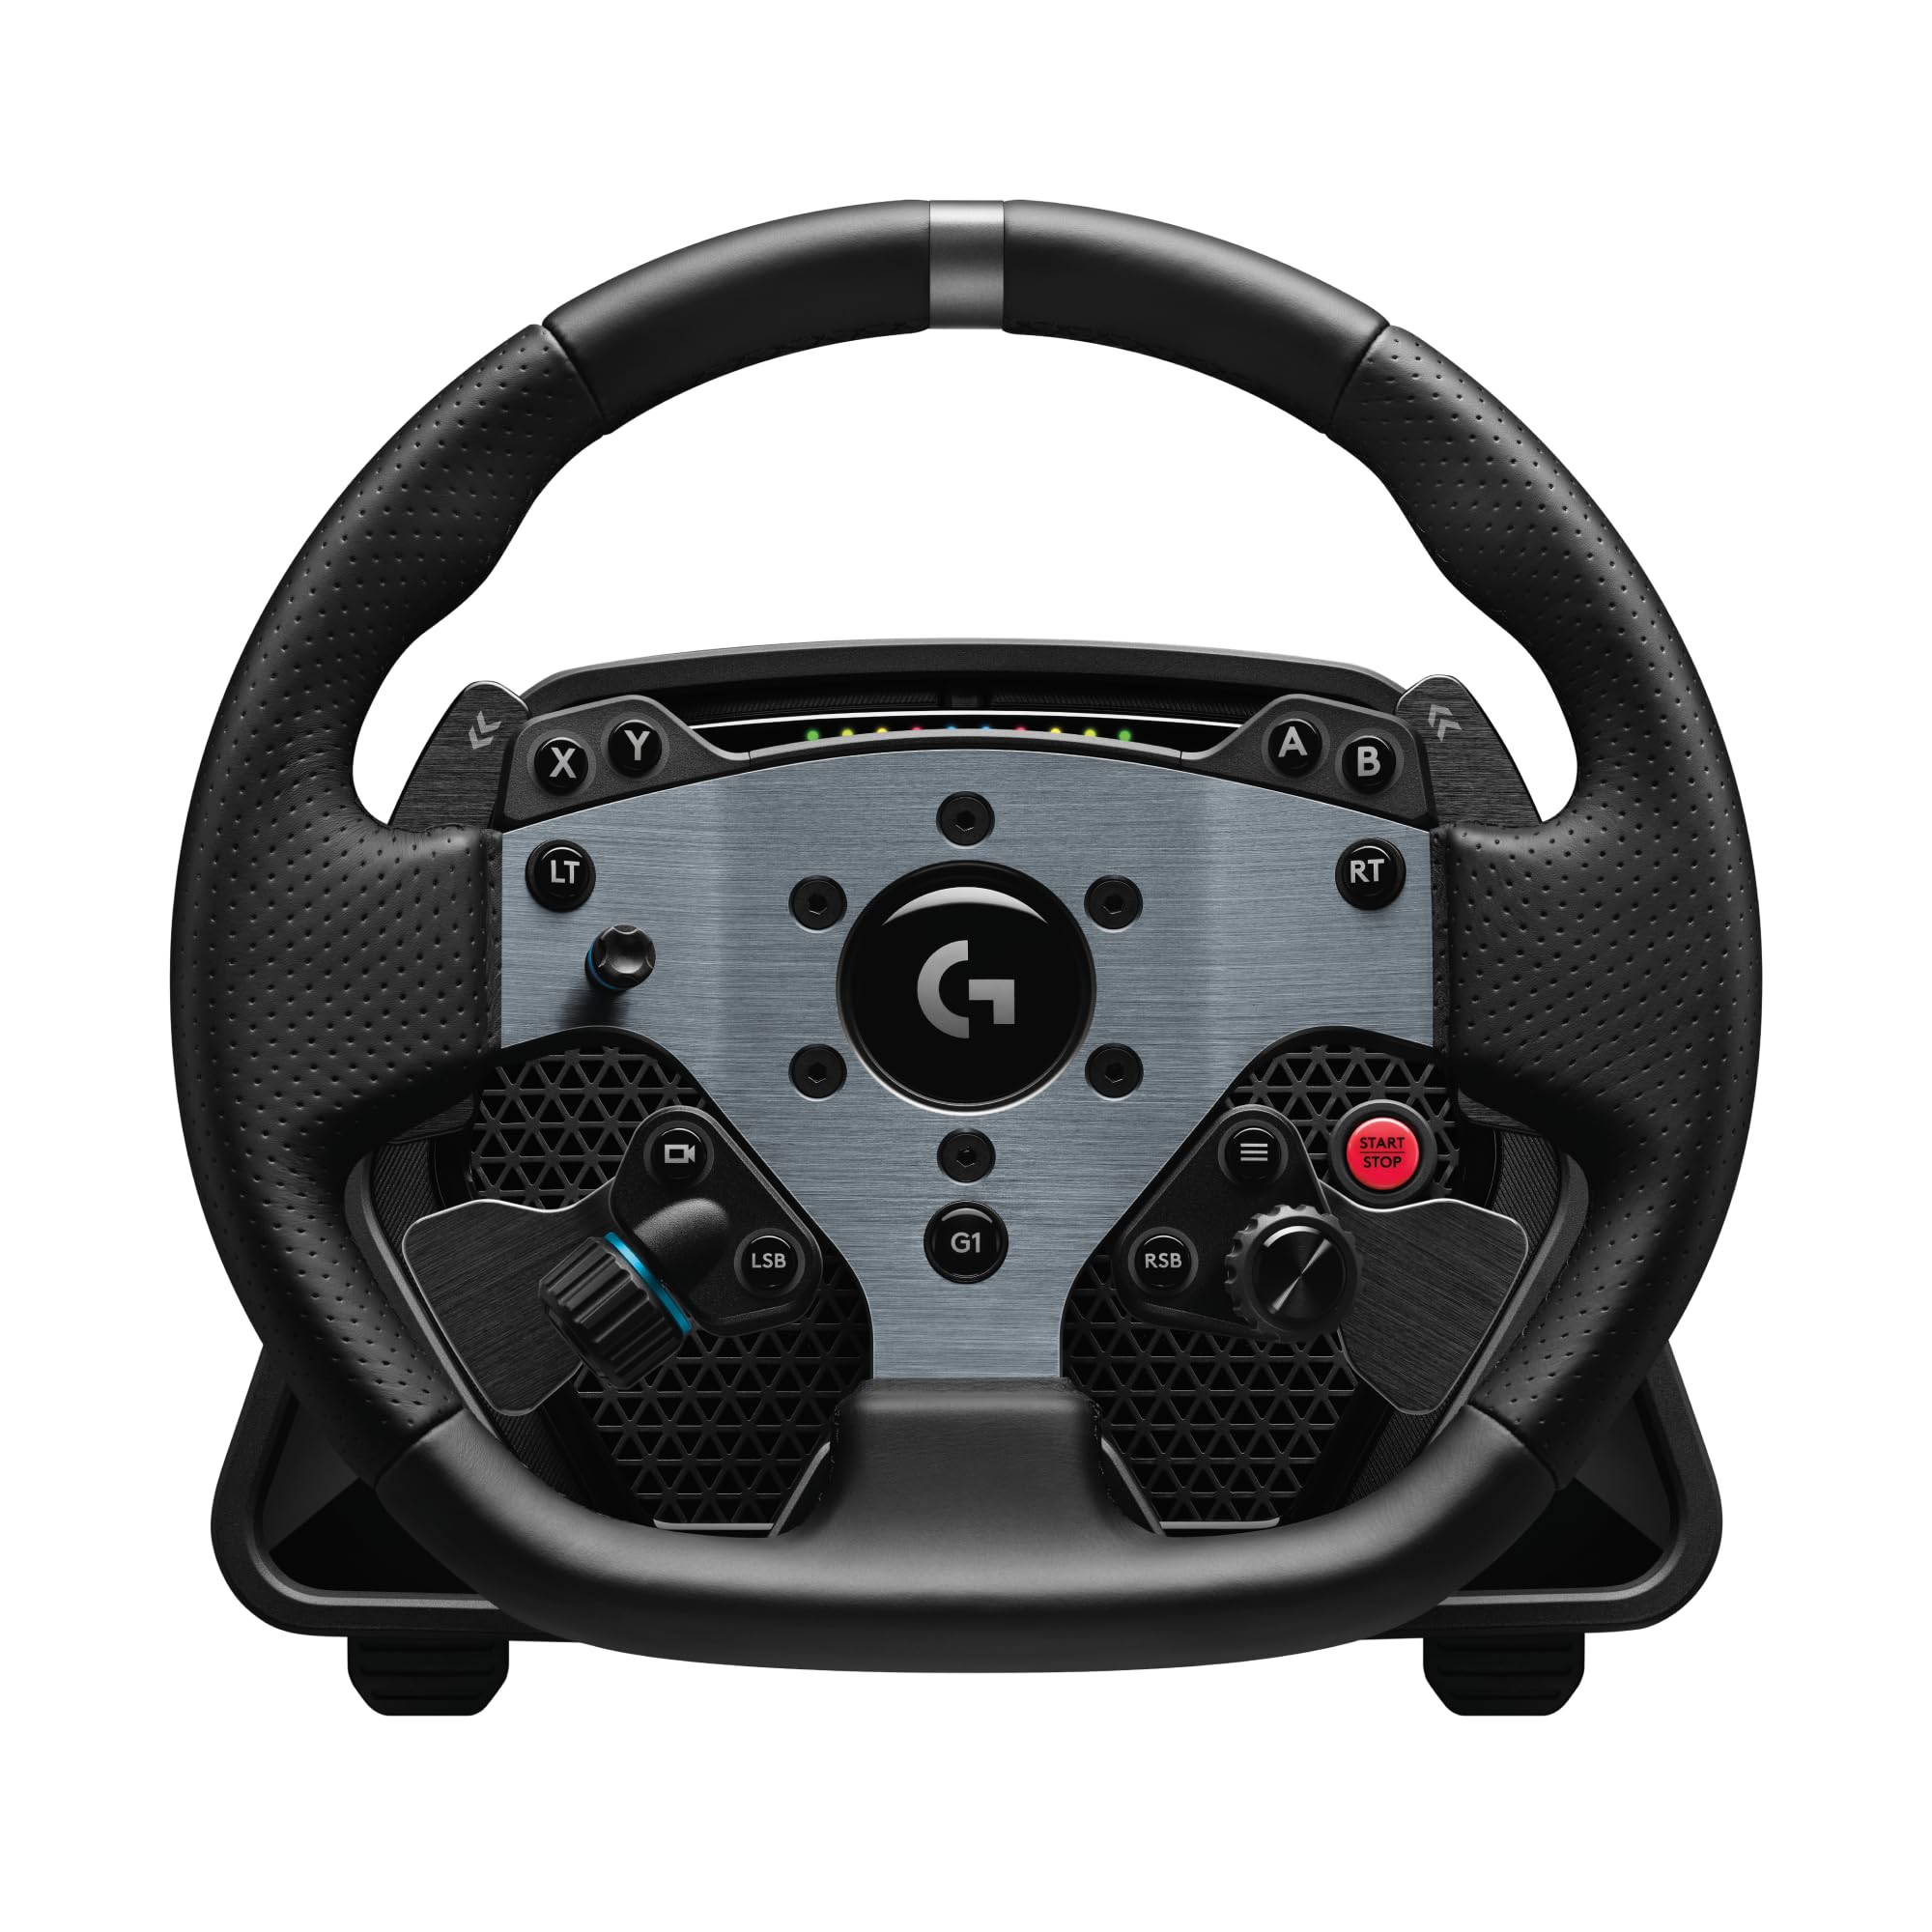 Updating Logitech Drivers: Discover the importance of keeping Logitech drivers up to date and how it can resolve compatibility issues.
Disabling Unnecessary Startup Programs: Find out how to streamline your system by disabling unnecessary programs that launch during startup.